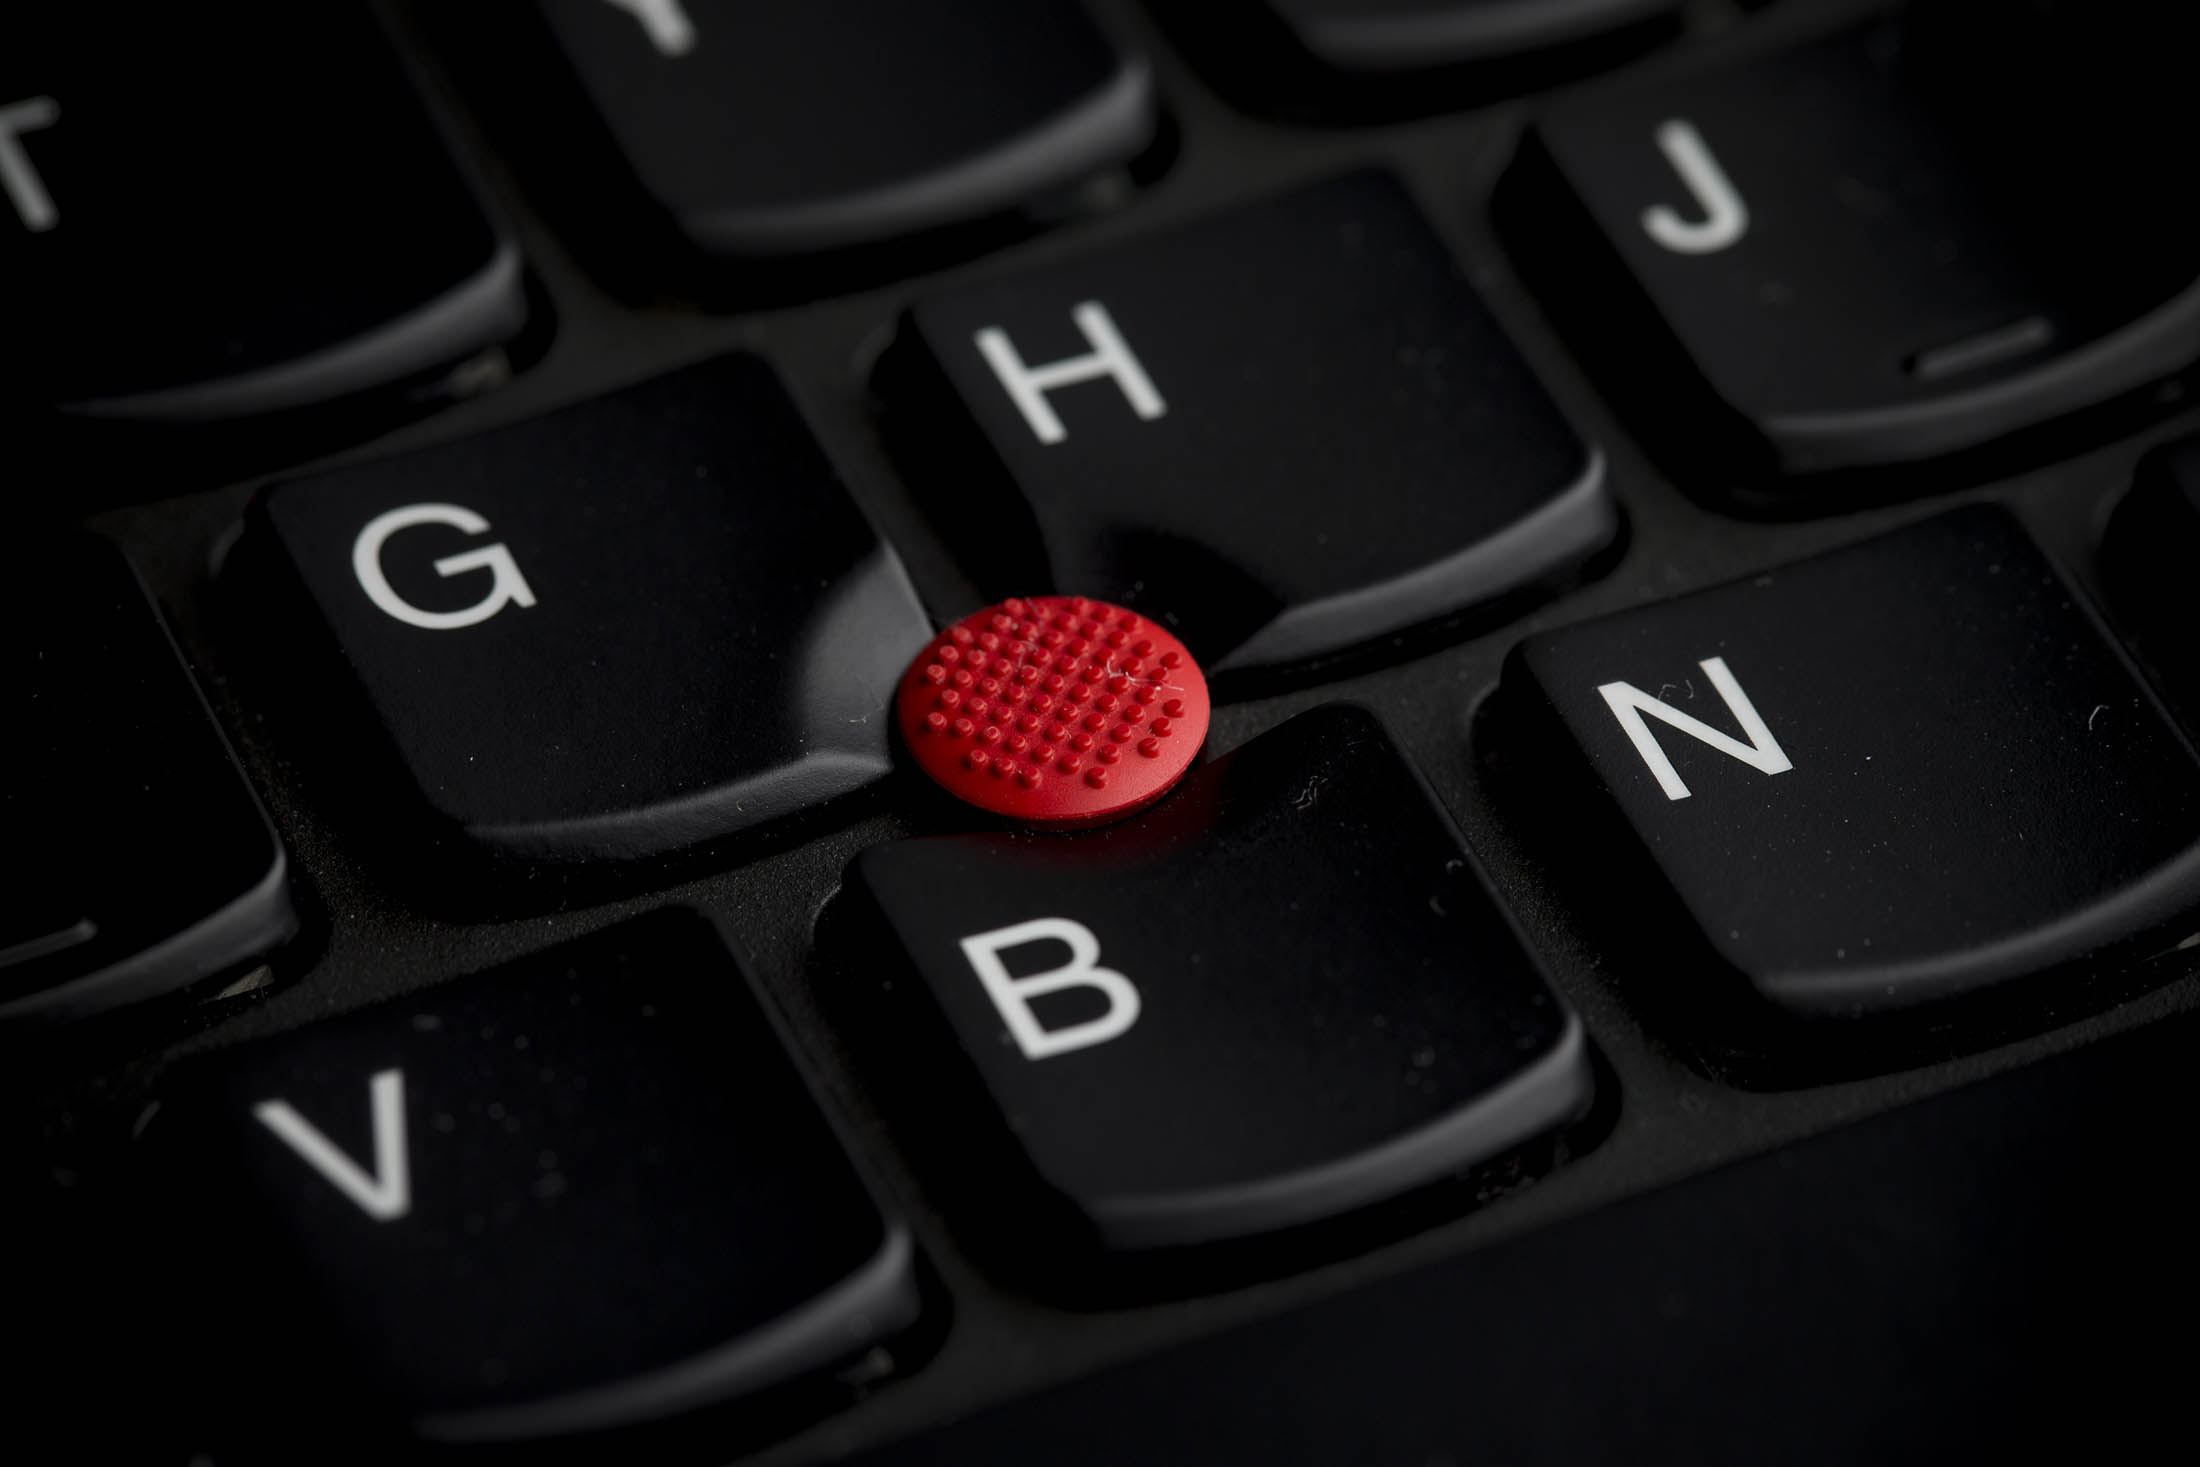 A Lenovo Group Ltd. trackpad button is displayed on a Lenovo ThinkPad T440s keyboard at the company's store in the Sha Tin district of Hong Kong, China, on Friday, Feb. 7, 2014. Lenovo, which has headquarters in Beijing and Morrisville, North Carolina, agreed to pay $2.3 billion for IBM’s low-end server unit on Jan. 23, adding a business with wider profit margins than PCs and giving it about 14 percent of the market.
